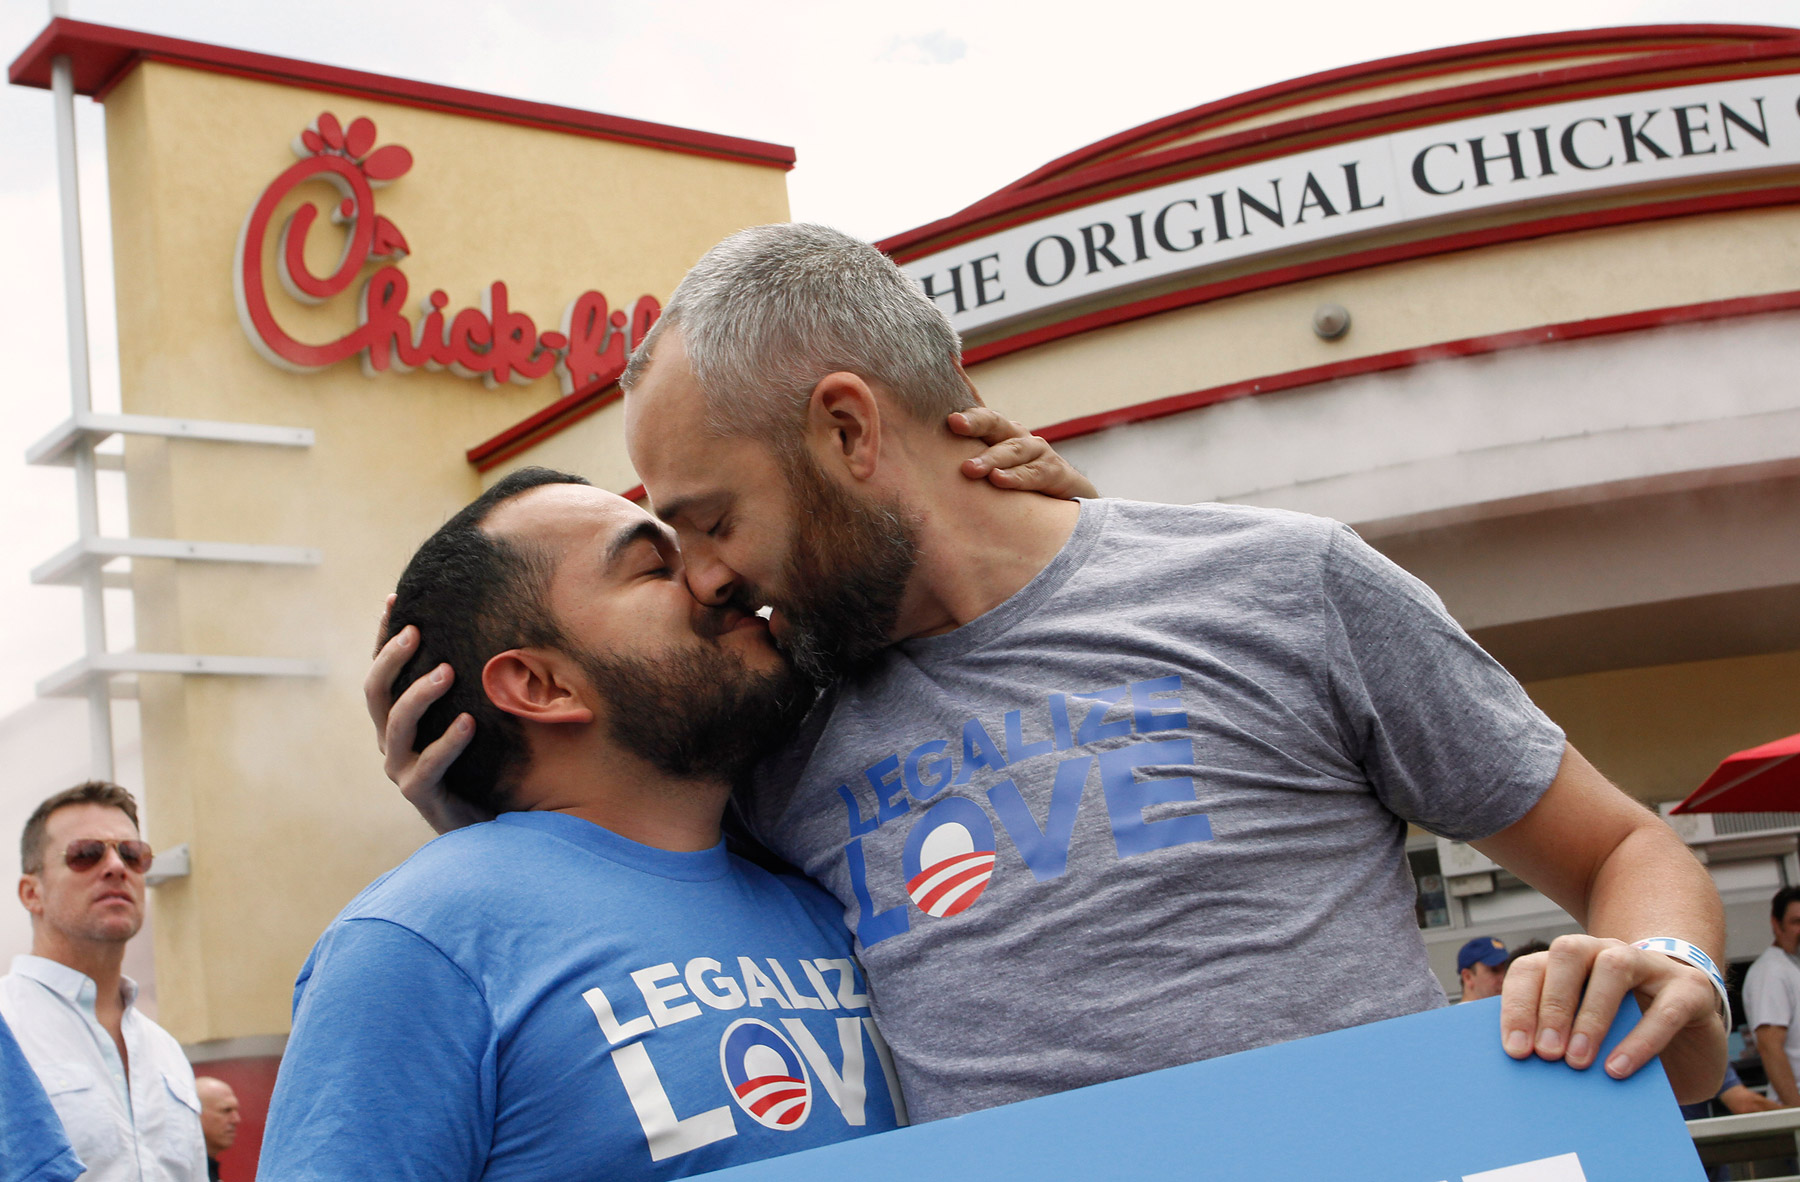 Eduardo Cisneros,left, and Luke Montgomery kiss on national "kiss-in" day at a Chick-fil-A restaurant in Hollywood, California, August 3, 2012. (Jonathan Alcorn—Reuters)